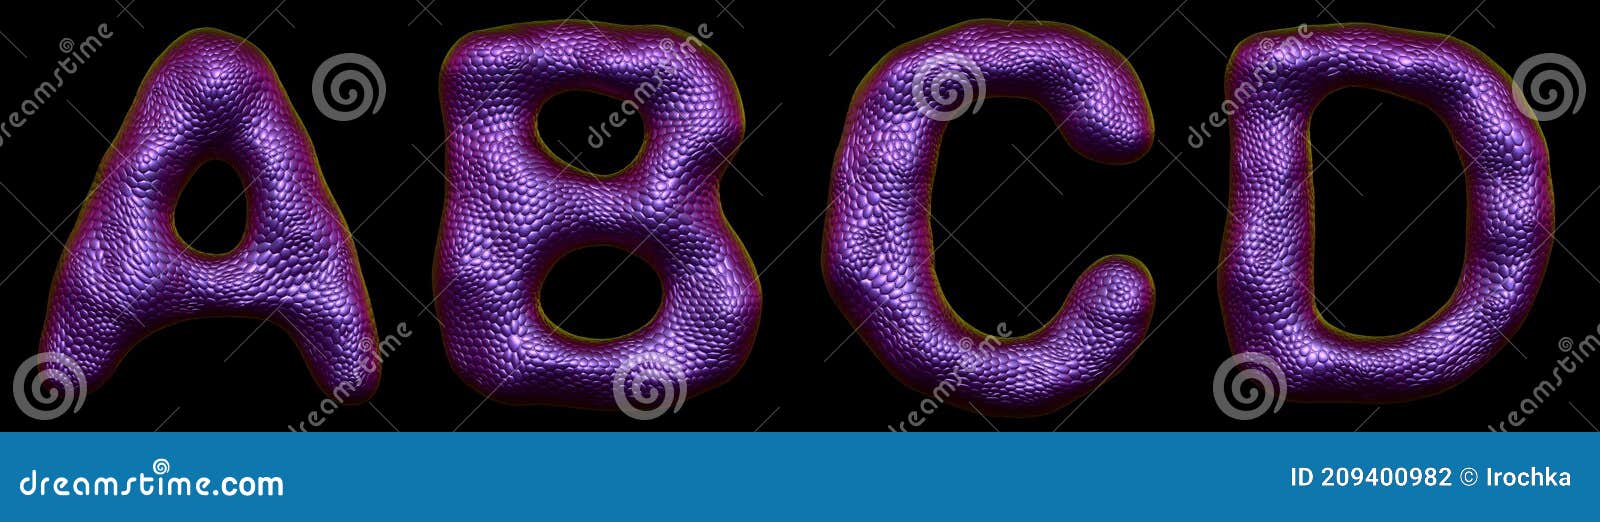 set of letters a, b, c, d made of realistic 3d render natural purple snake skin texture.